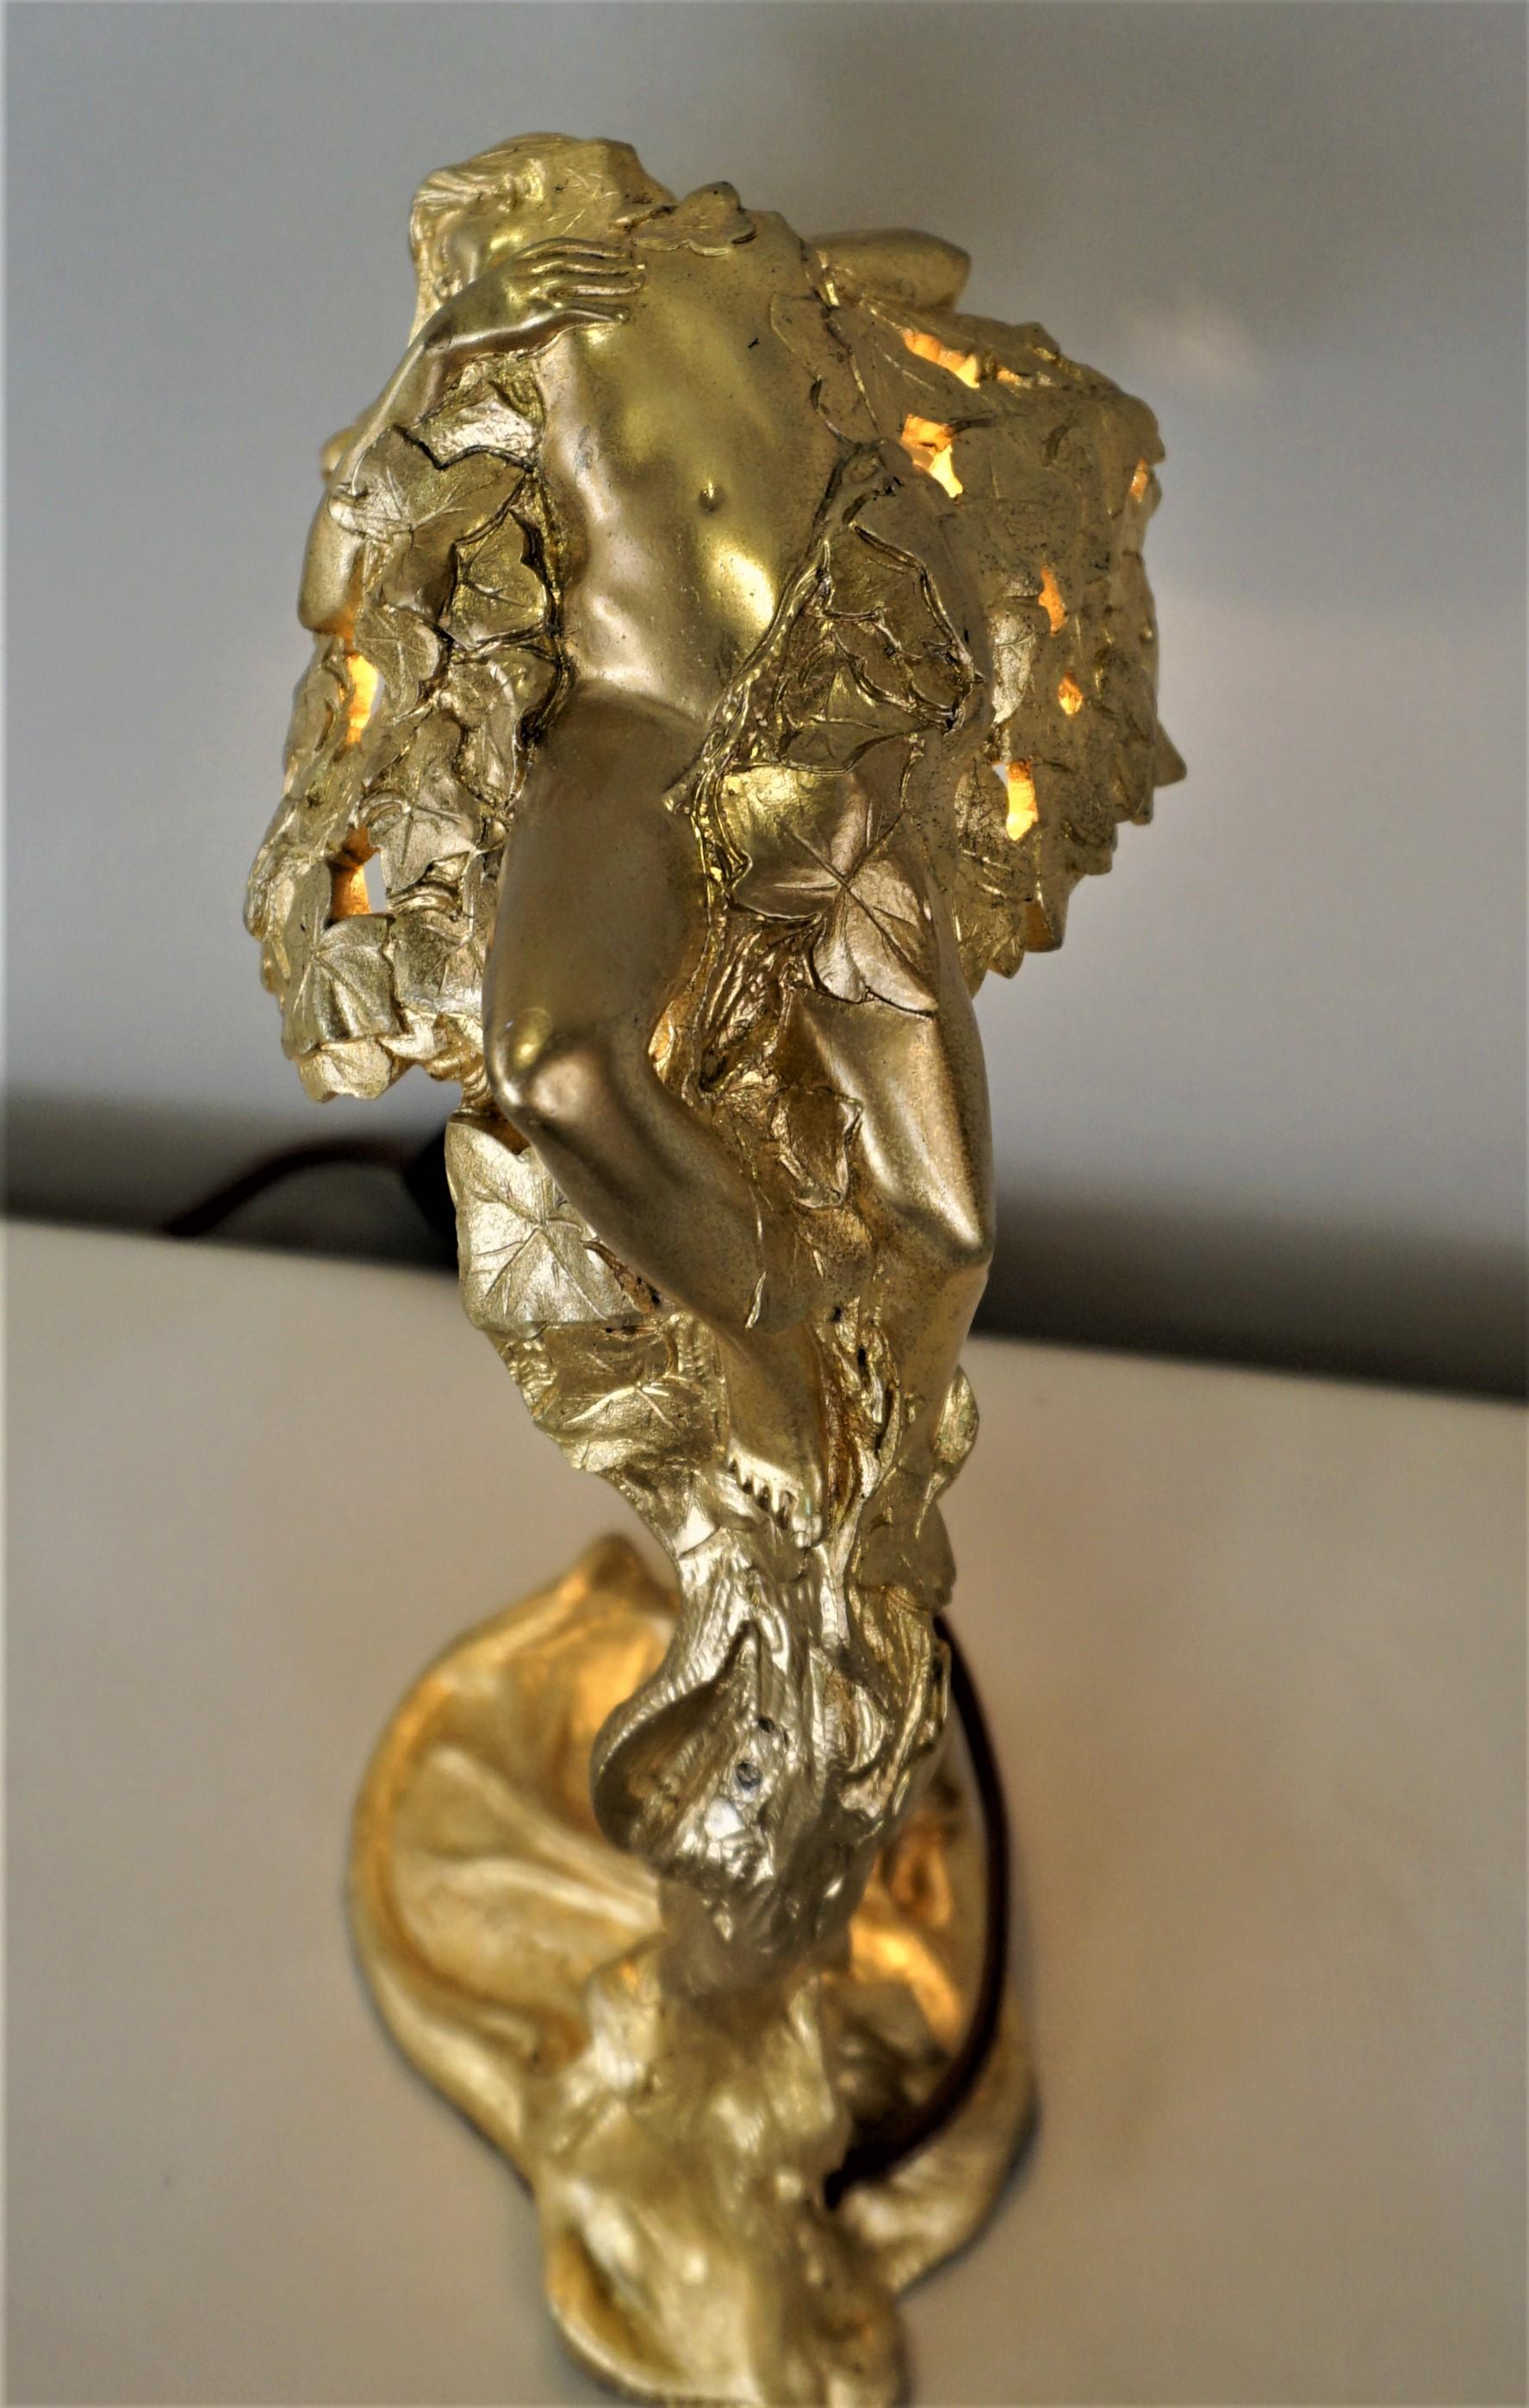 Doré Art Nouveau bronze table lamp from 1902 design and created by Emil Thomasson. This design depicts how the nymph Daphne turns into a laurel tree.